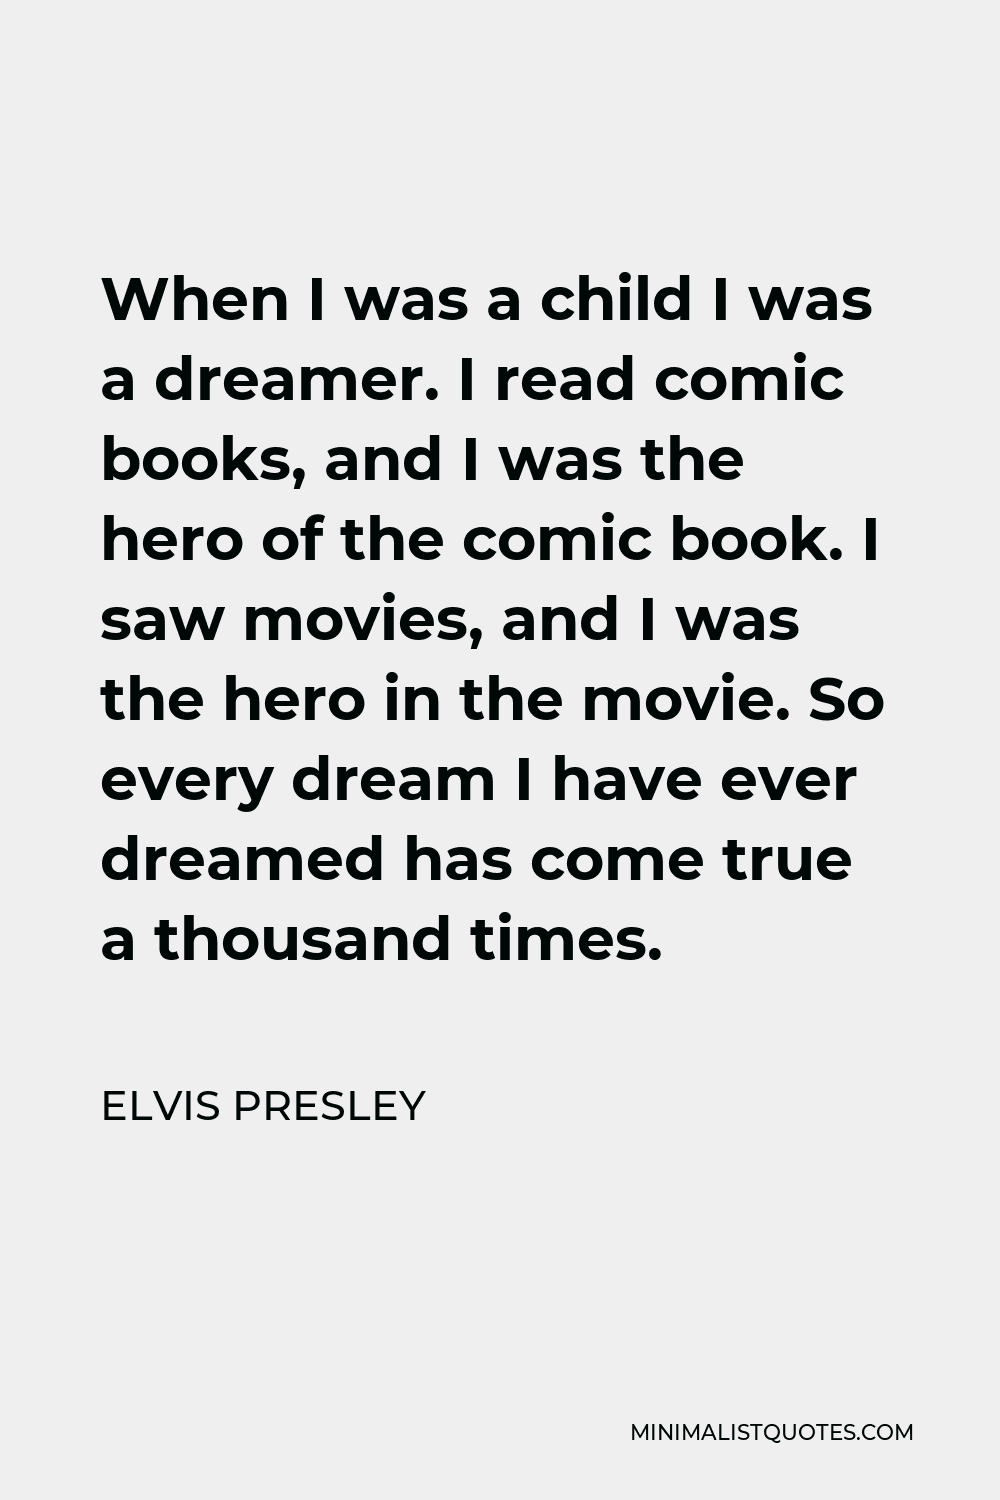 Elvis Presley Quote - When I was a child I was a dreamer. I read comic books, and I was the hero of the comic book. I saw movies, and I was the hero in the movie. So every dream I have ever dreamed has come true a thousand times.